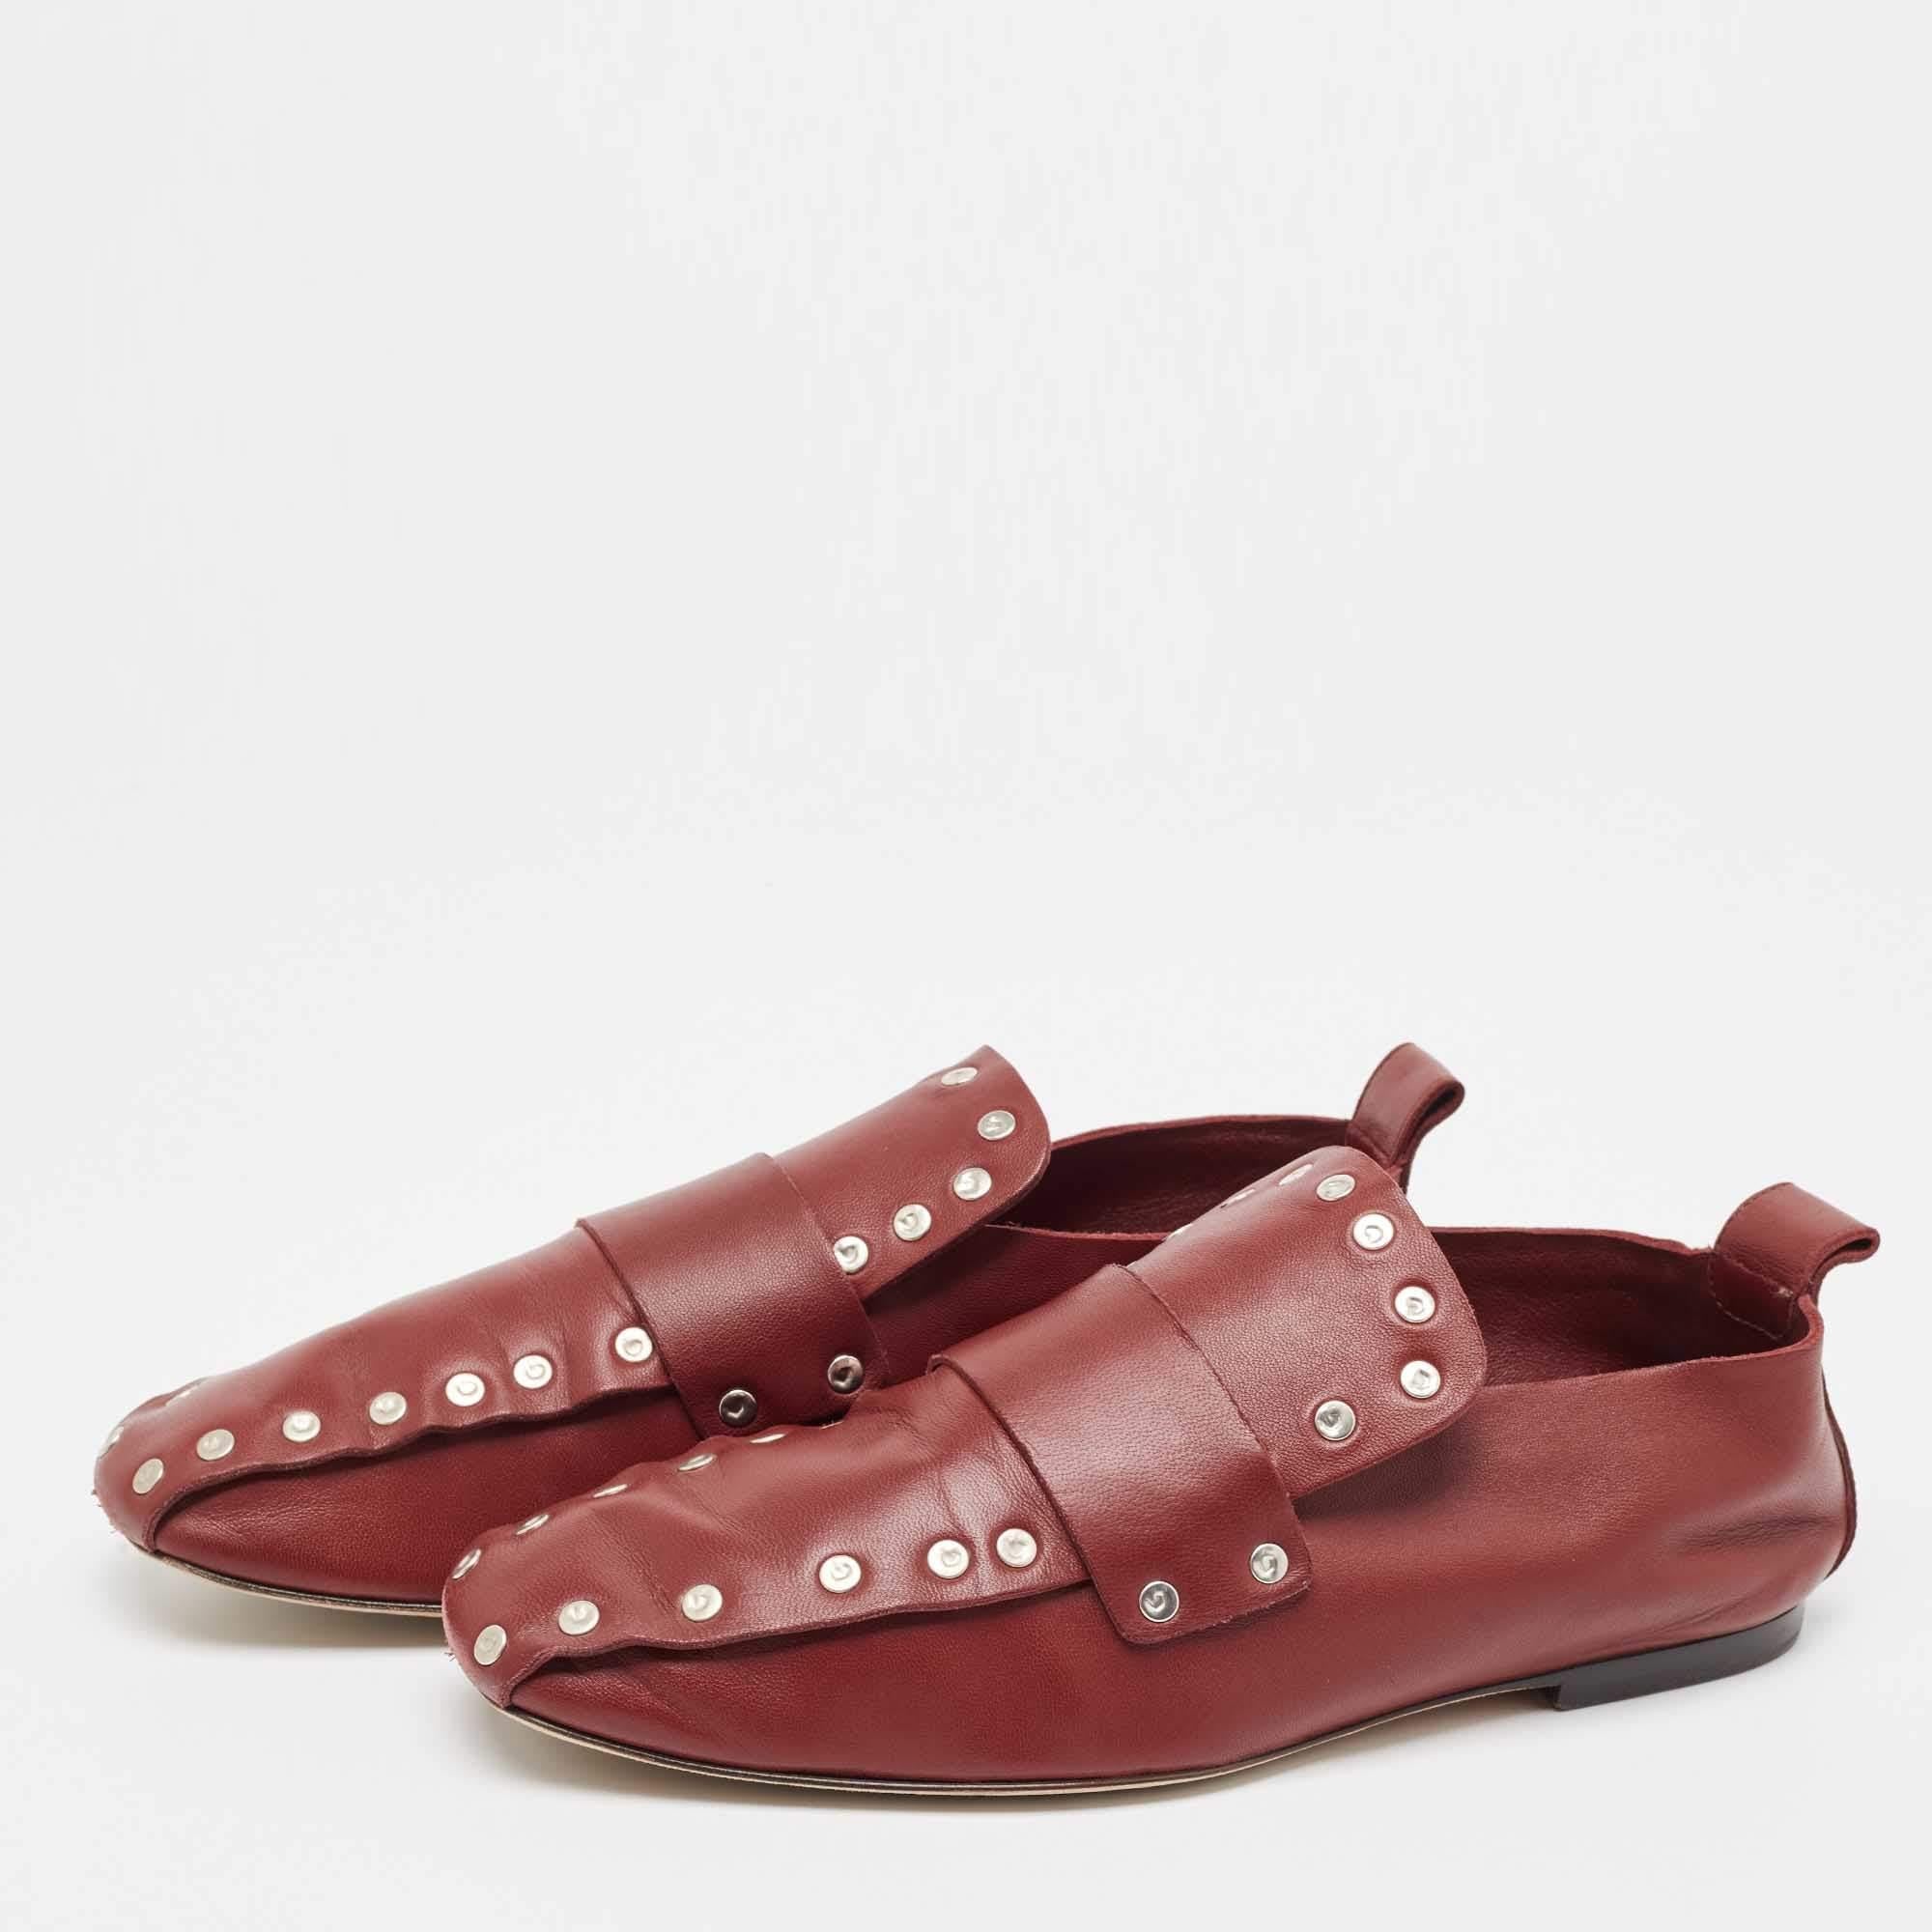 Women's Celine Red Leather Slip On Loafers Size 38